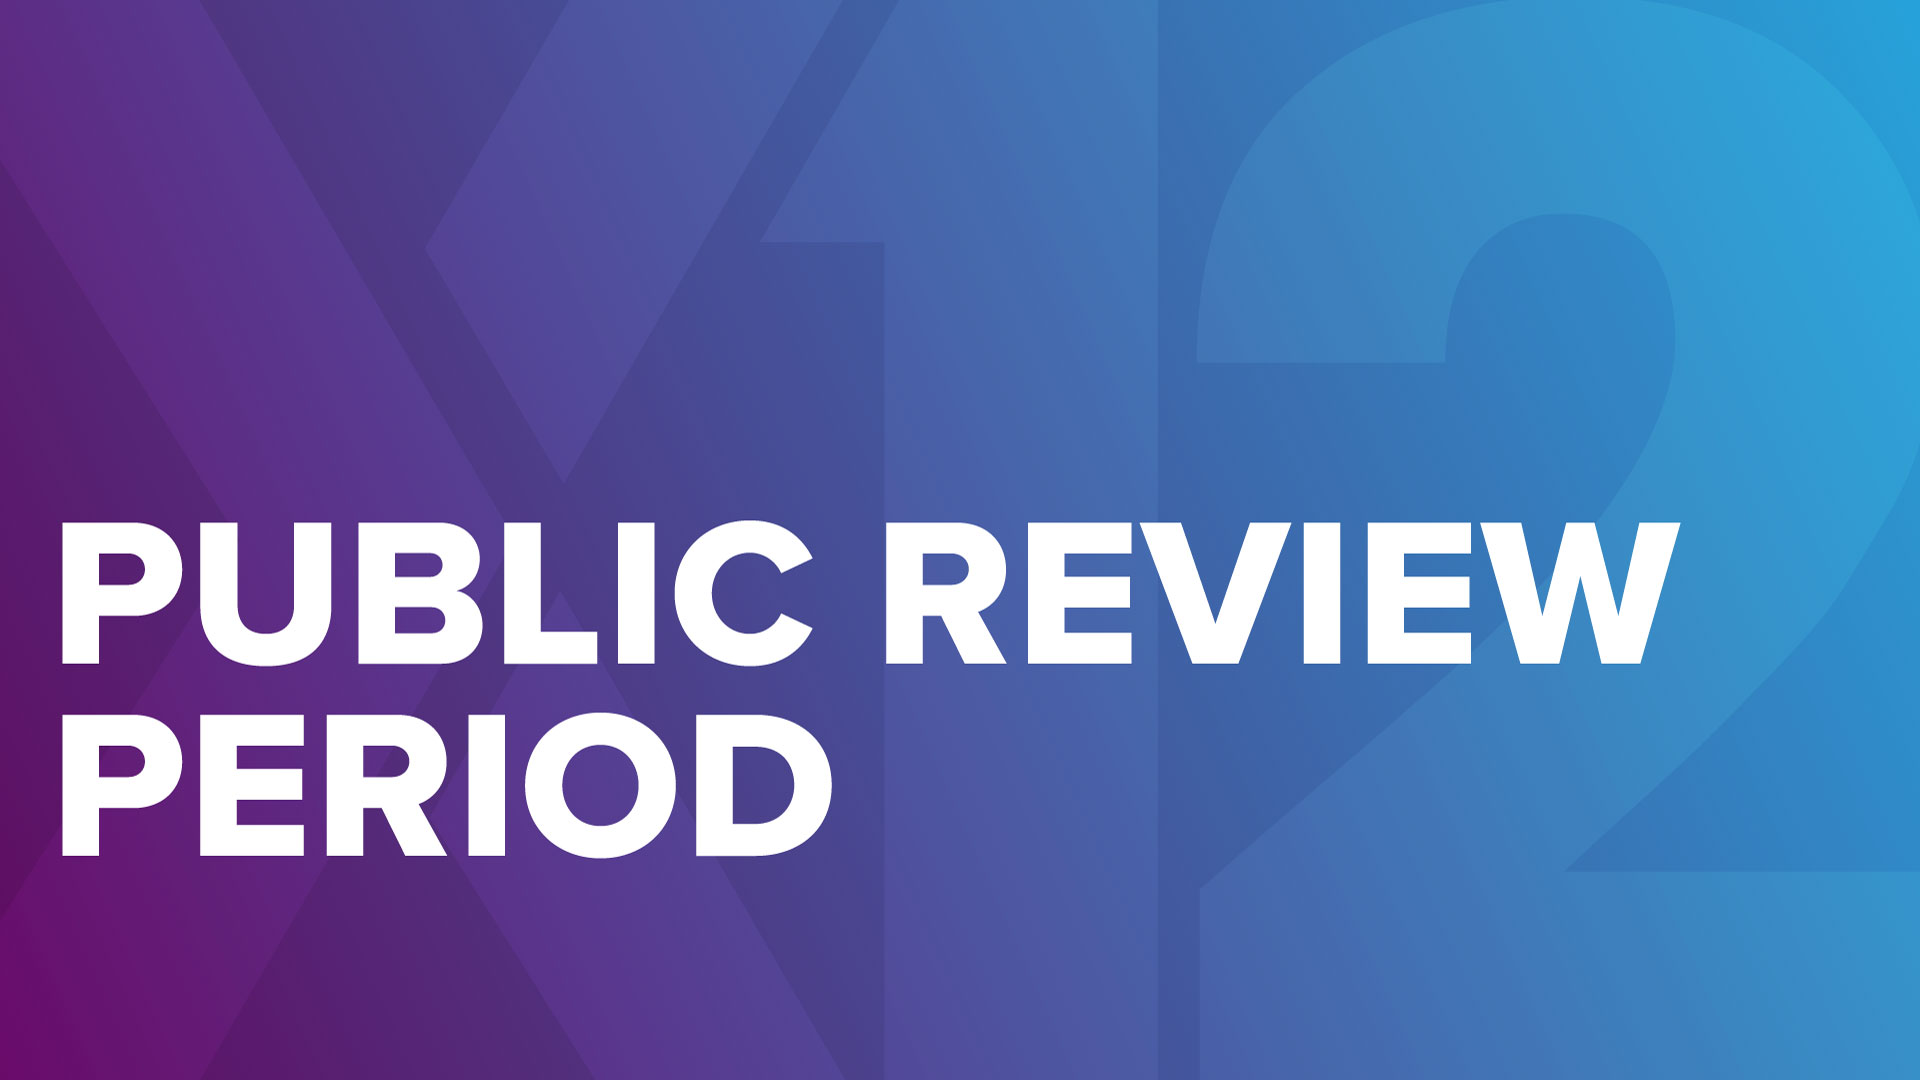 Public Review Period newscard